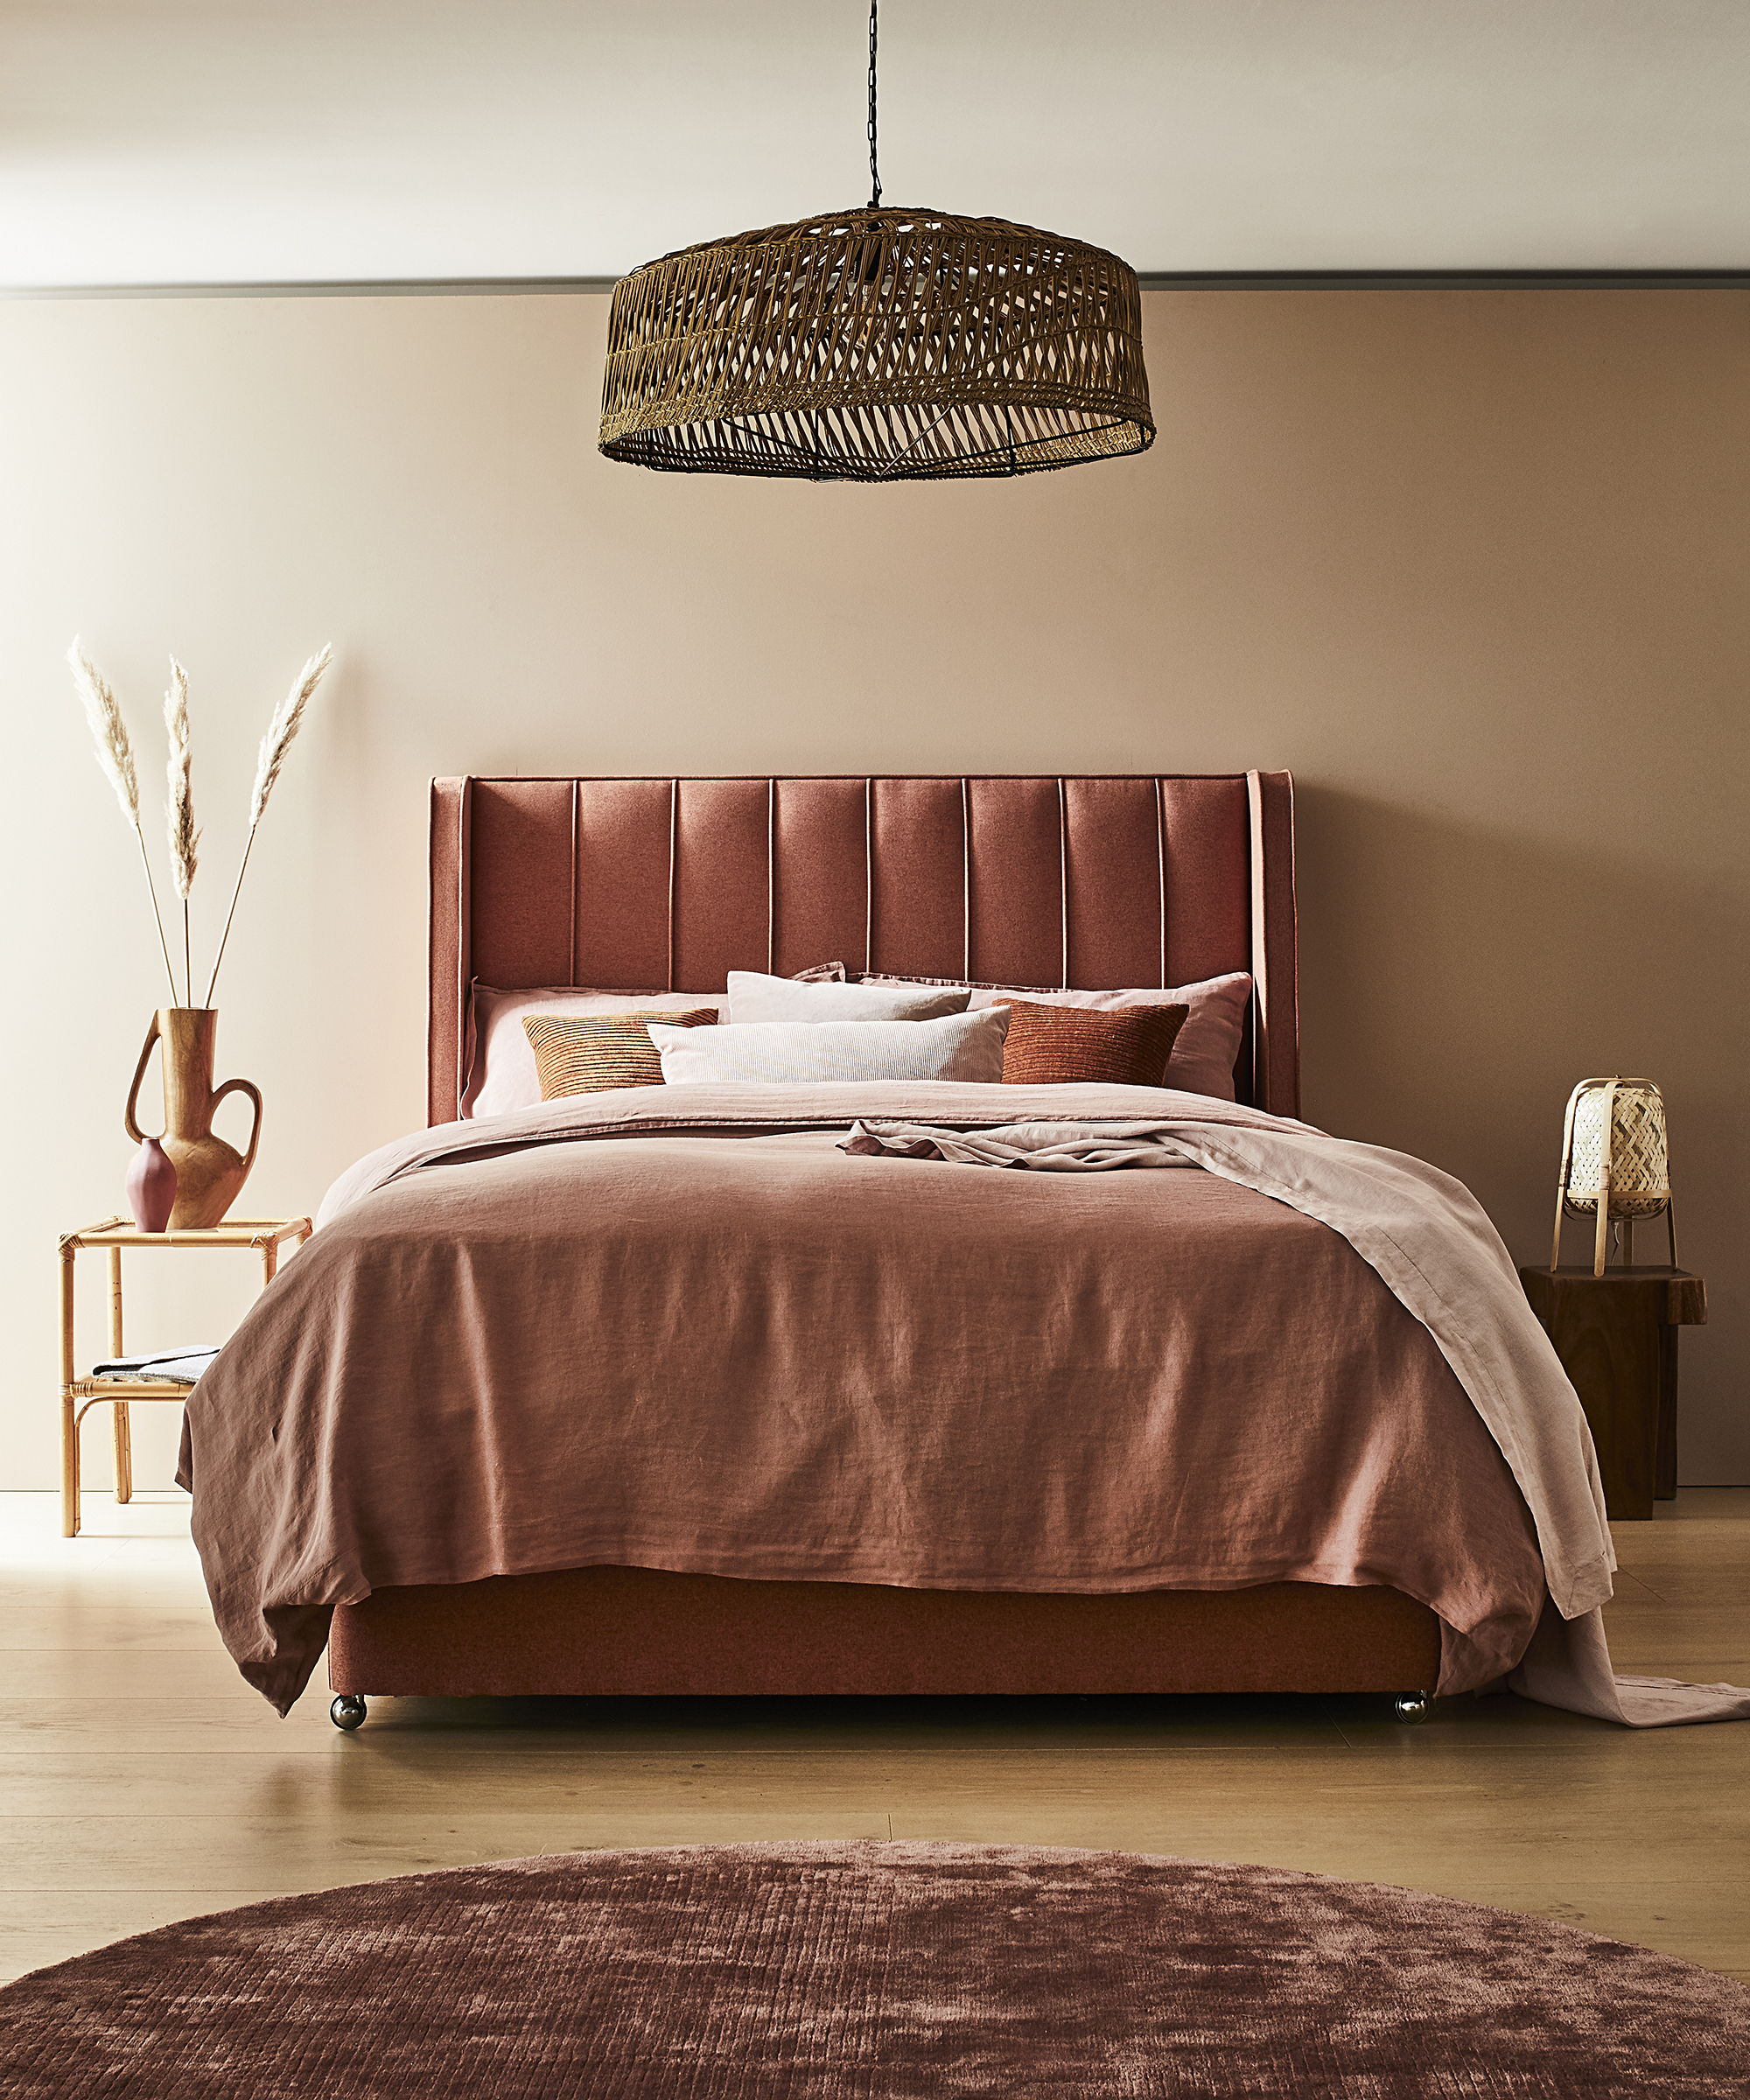 A pink bed in front of a pink wall with a rattan ceiling light